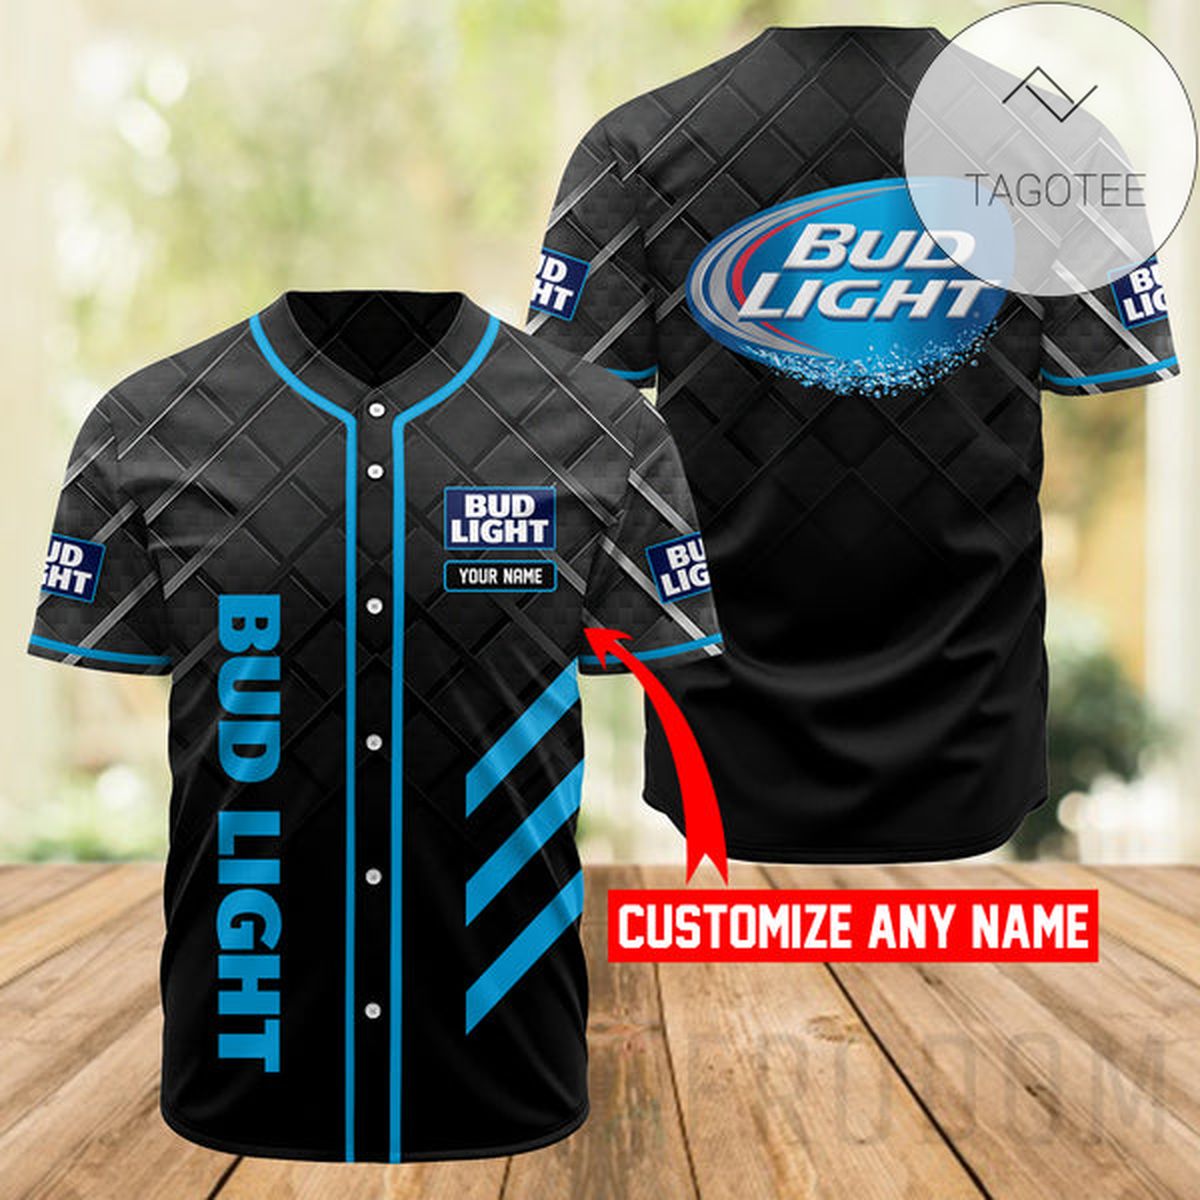 Top Rated Personalized Vintage Bud Light Jersey